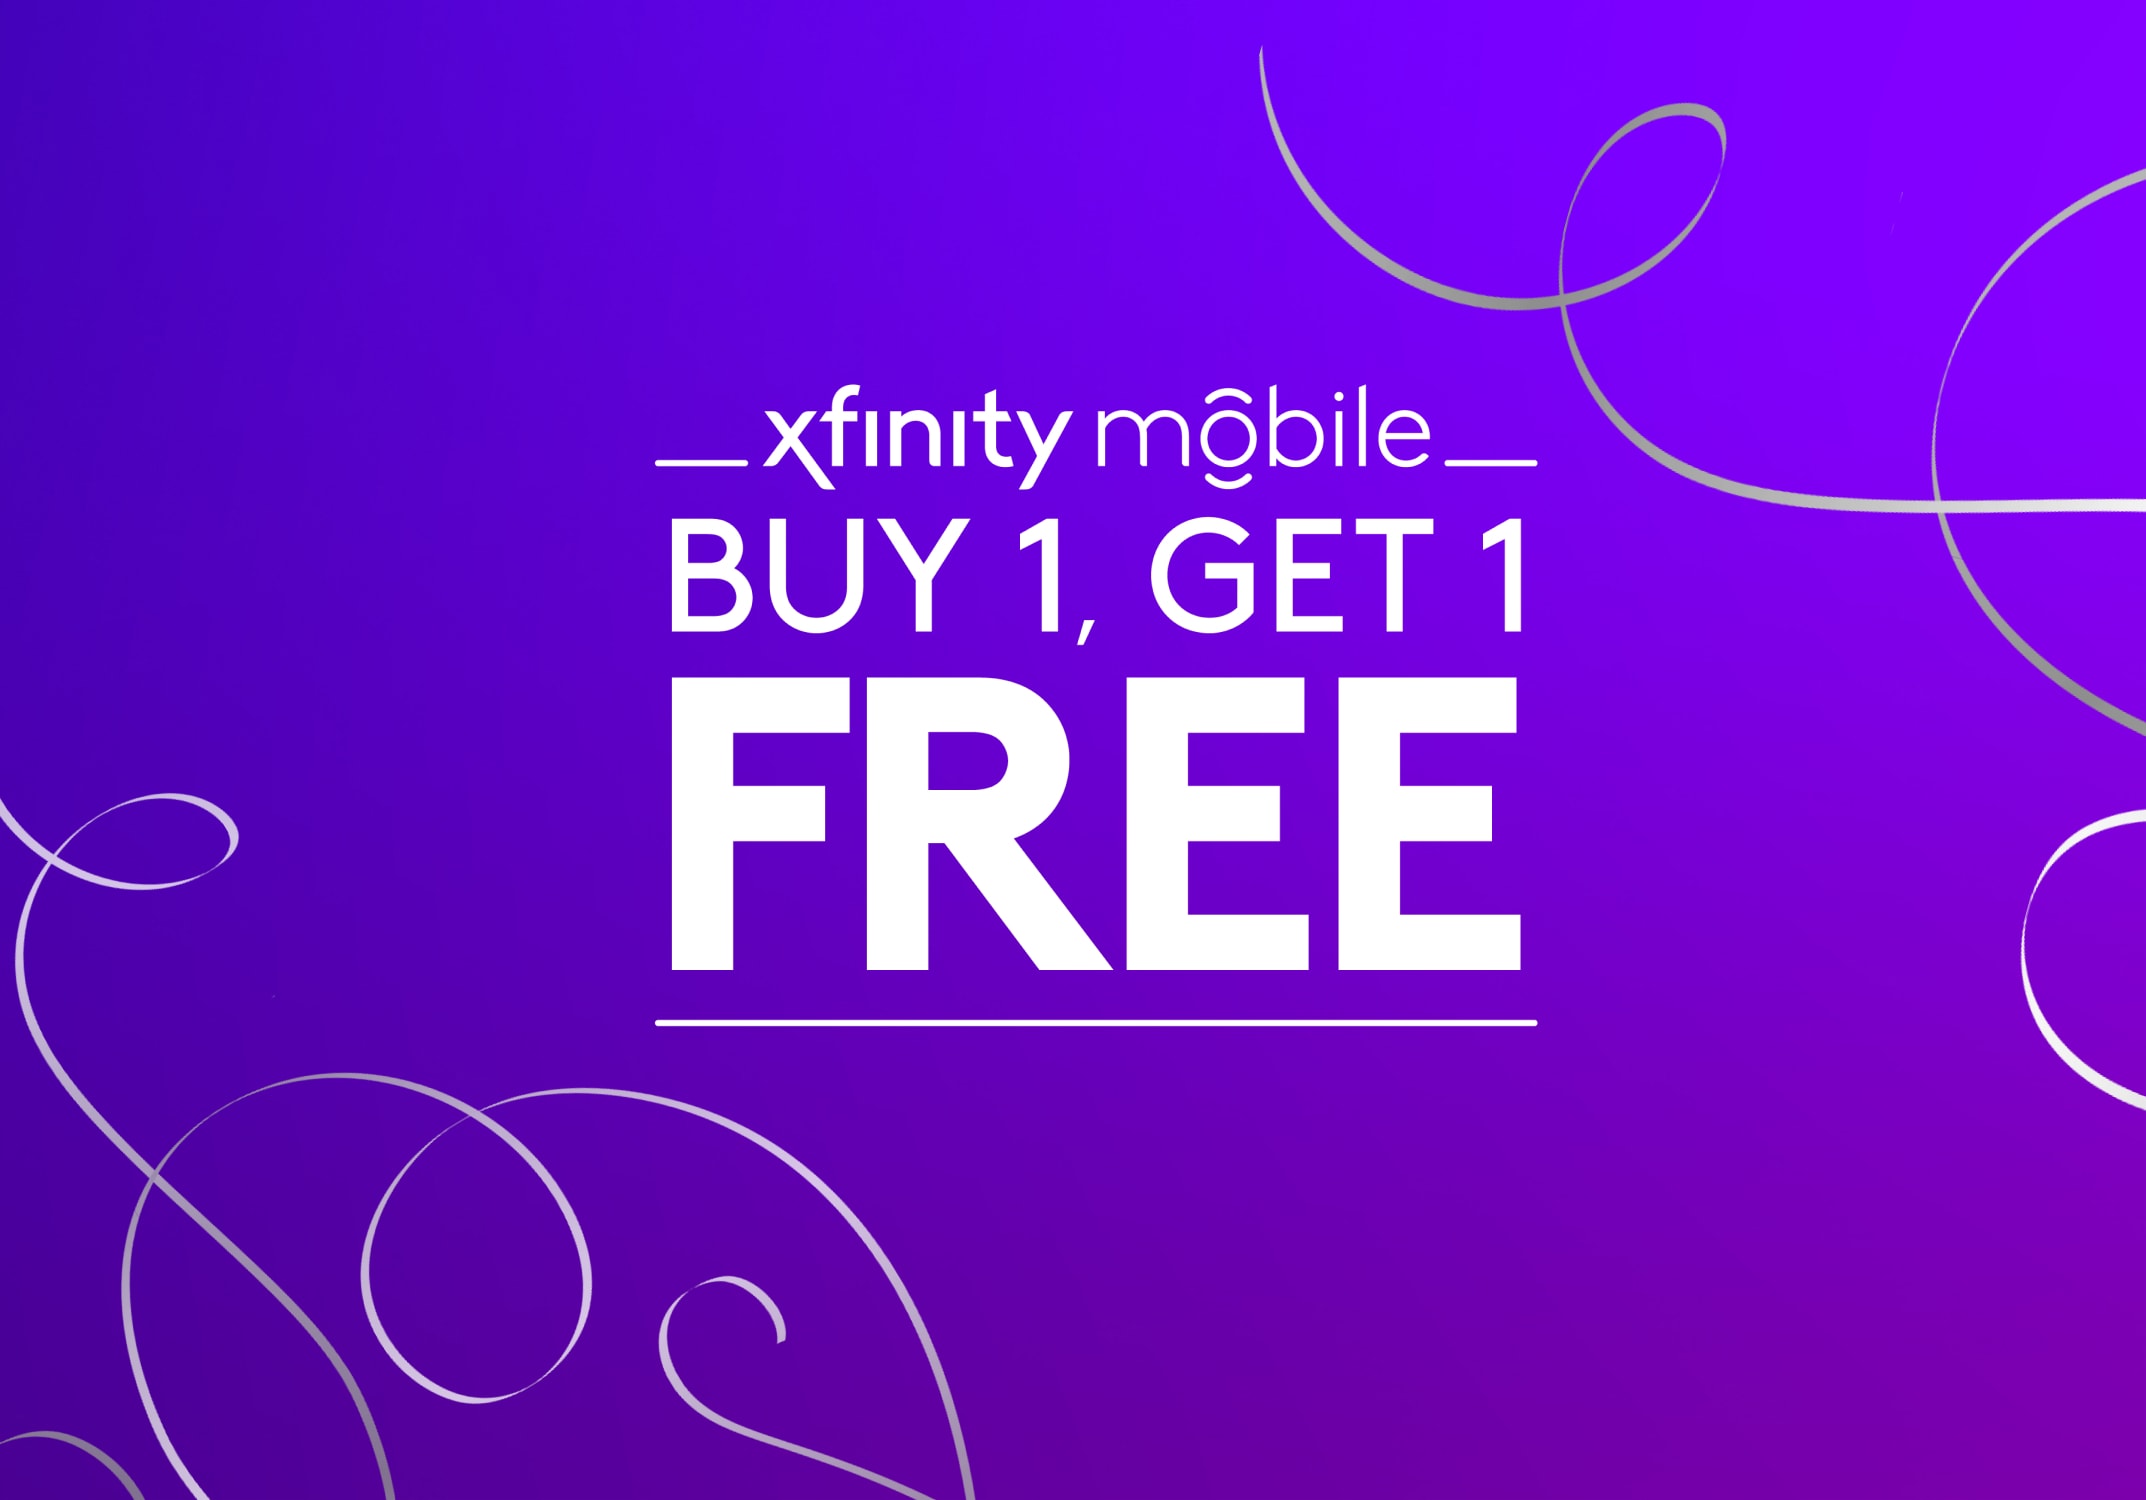 Xfinity Mobile Black Friday Sale is Here!